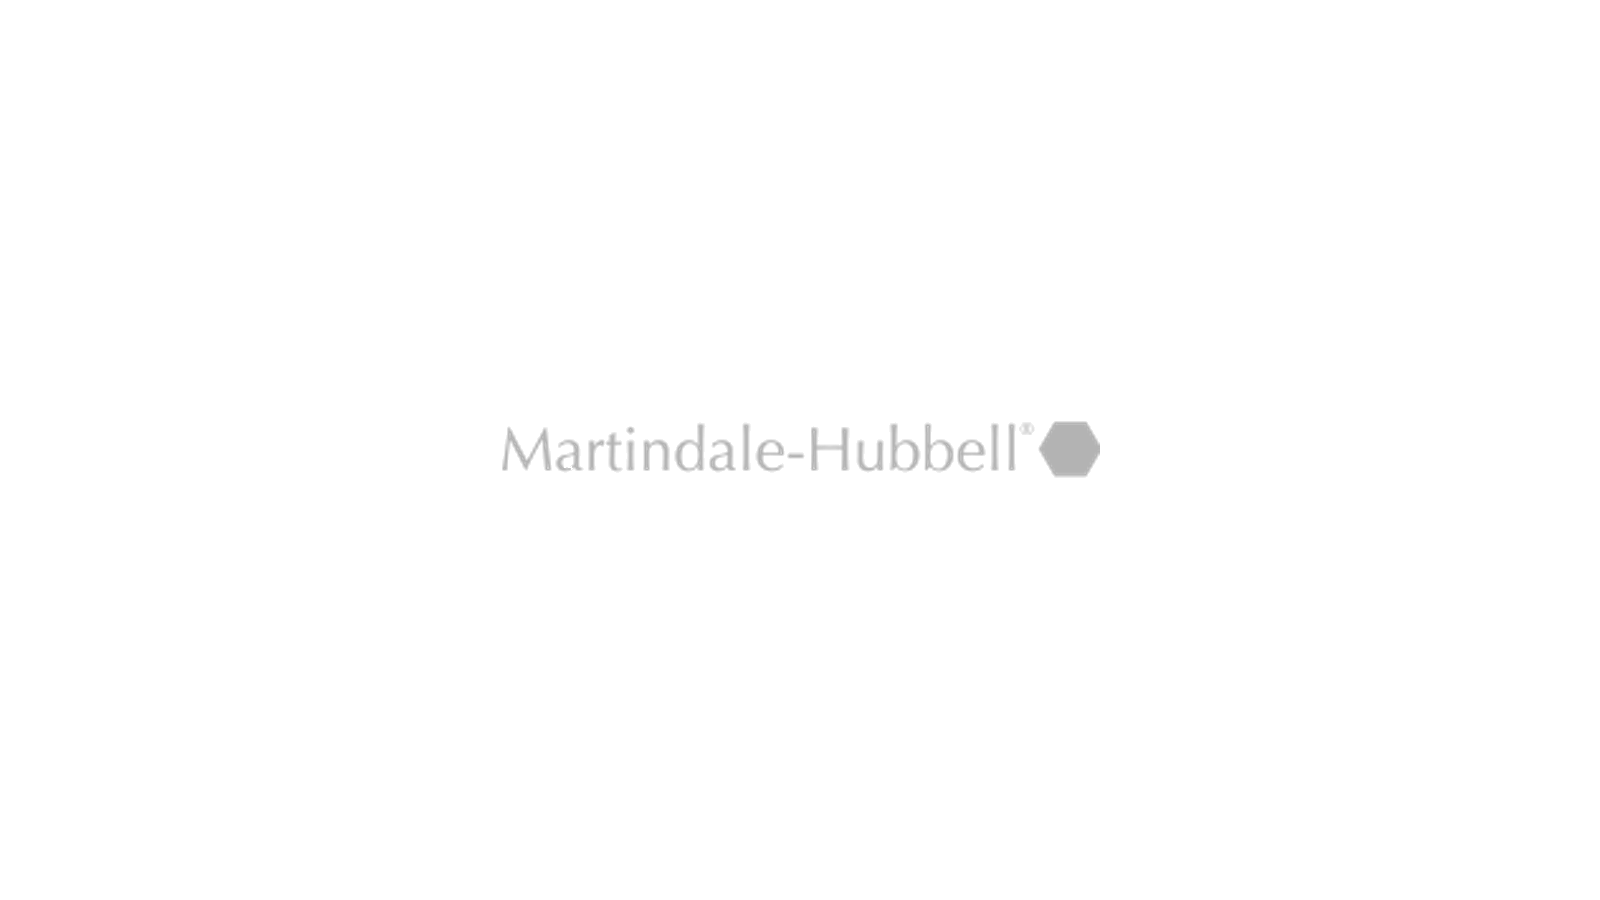 Hubbell Logo - Martindale Hubbell Lawyer Ratings and Directory Review 2019